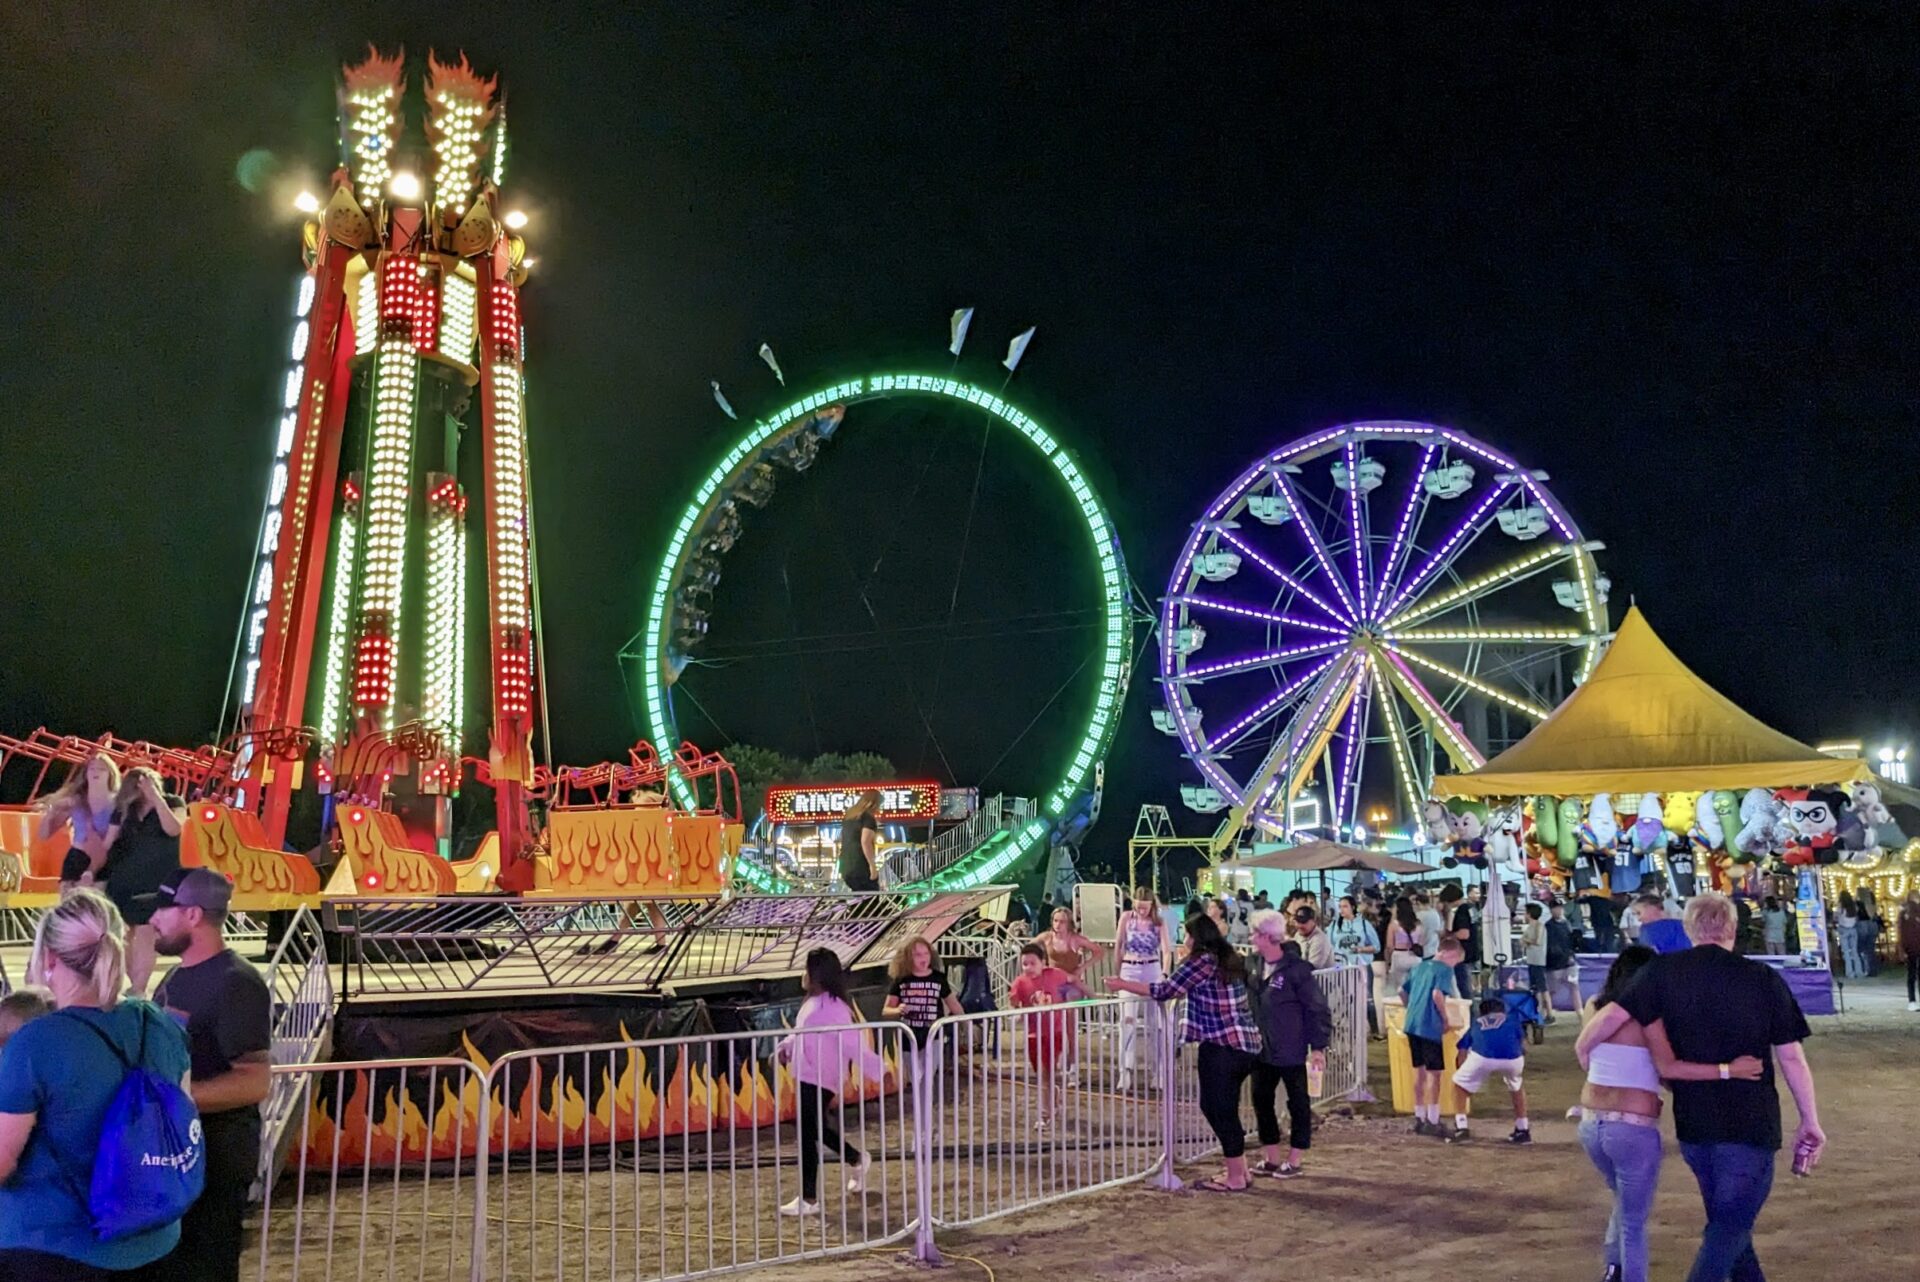 The colors of the midway attracted you people Friday night at the Brown County Fair. Aberdeen Insider photo by Scott Waltman